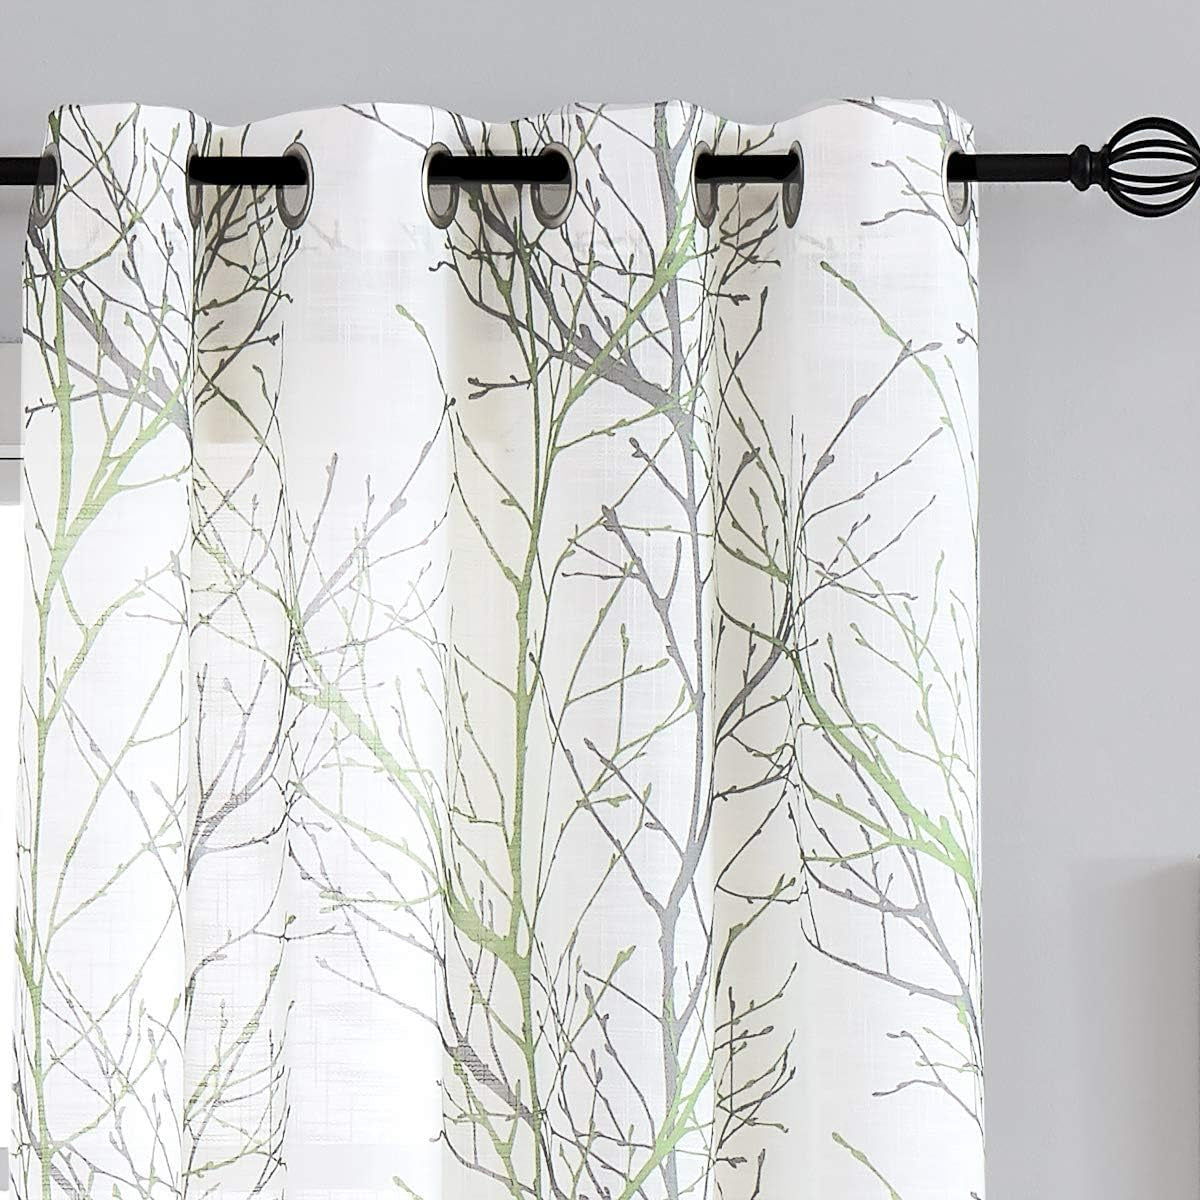 FMFUNCTEX Blue White Curtains for Kitchen Living Room 72“ Grey Tree Branches Print Curtain Set for Small Windows Linen Textured Semi-Sheer Drapes for Bedroom Grommet Top, 2 Panels  Fmfunctex Green 50" X 54" |2Pcs 